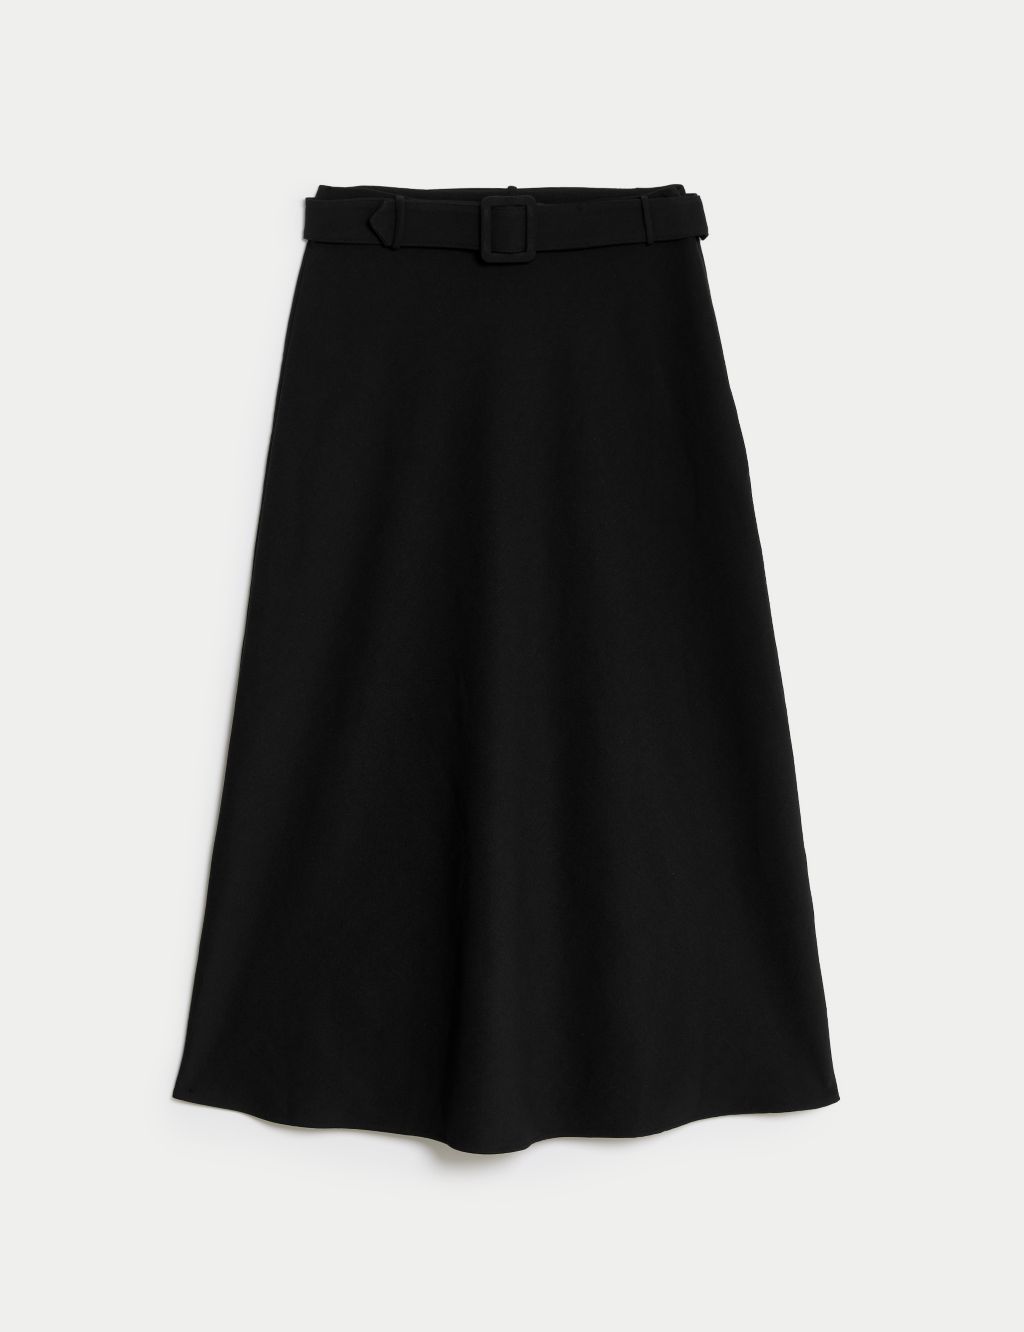 Belted Midaxi A-Line Skirt image 2